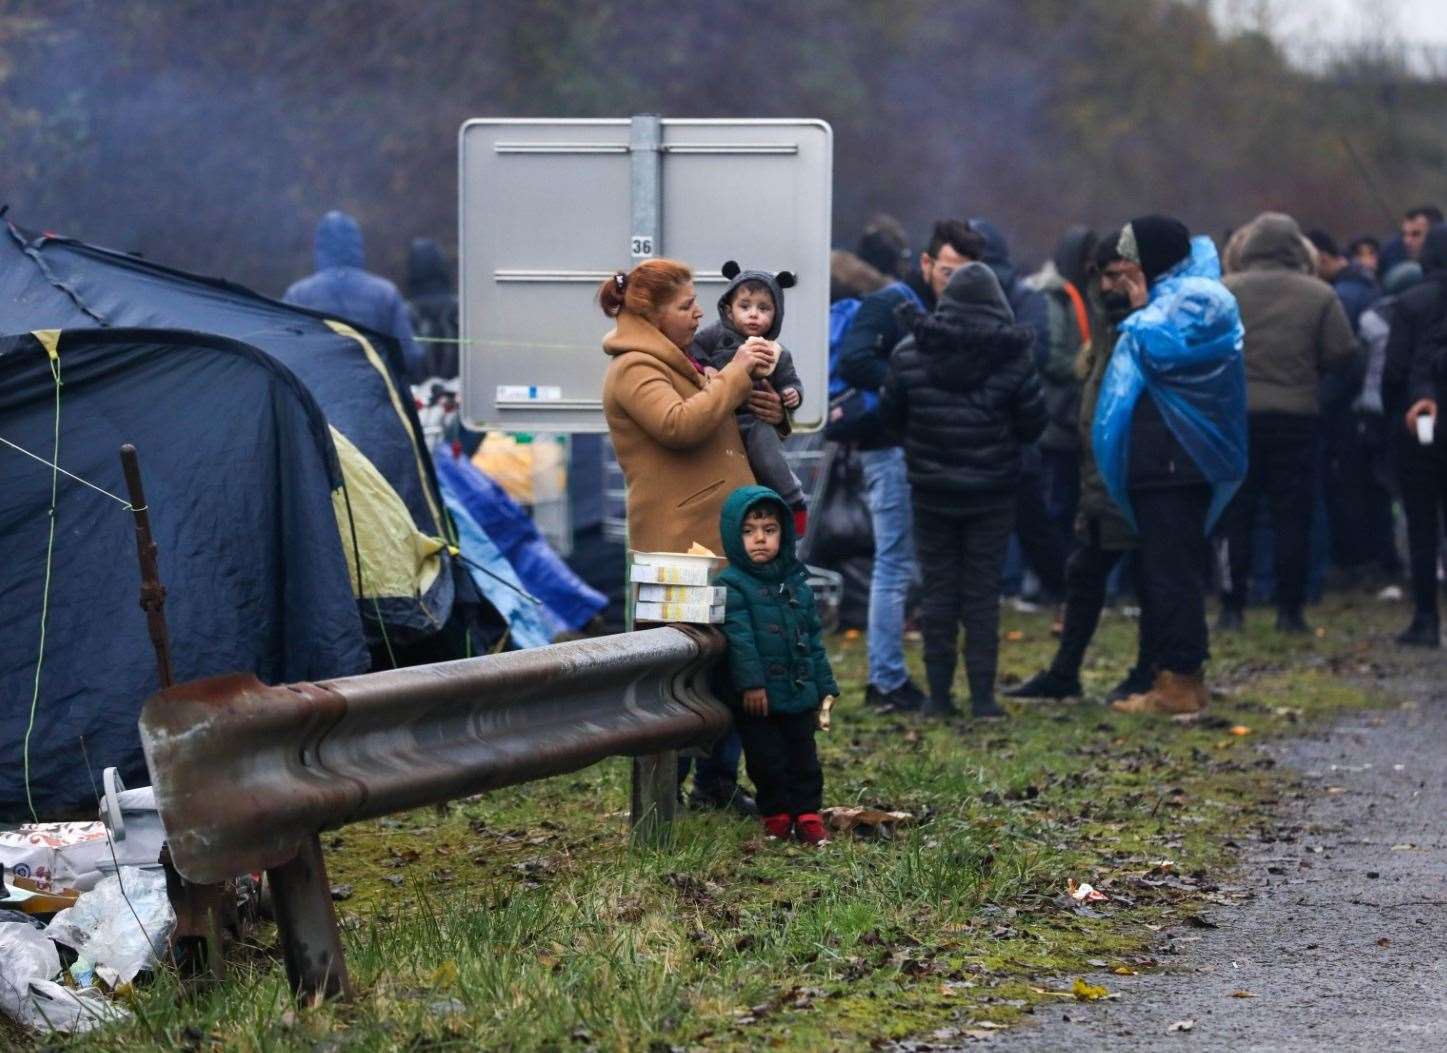 Asylum seekers pictured in France. Picture: UKNIP